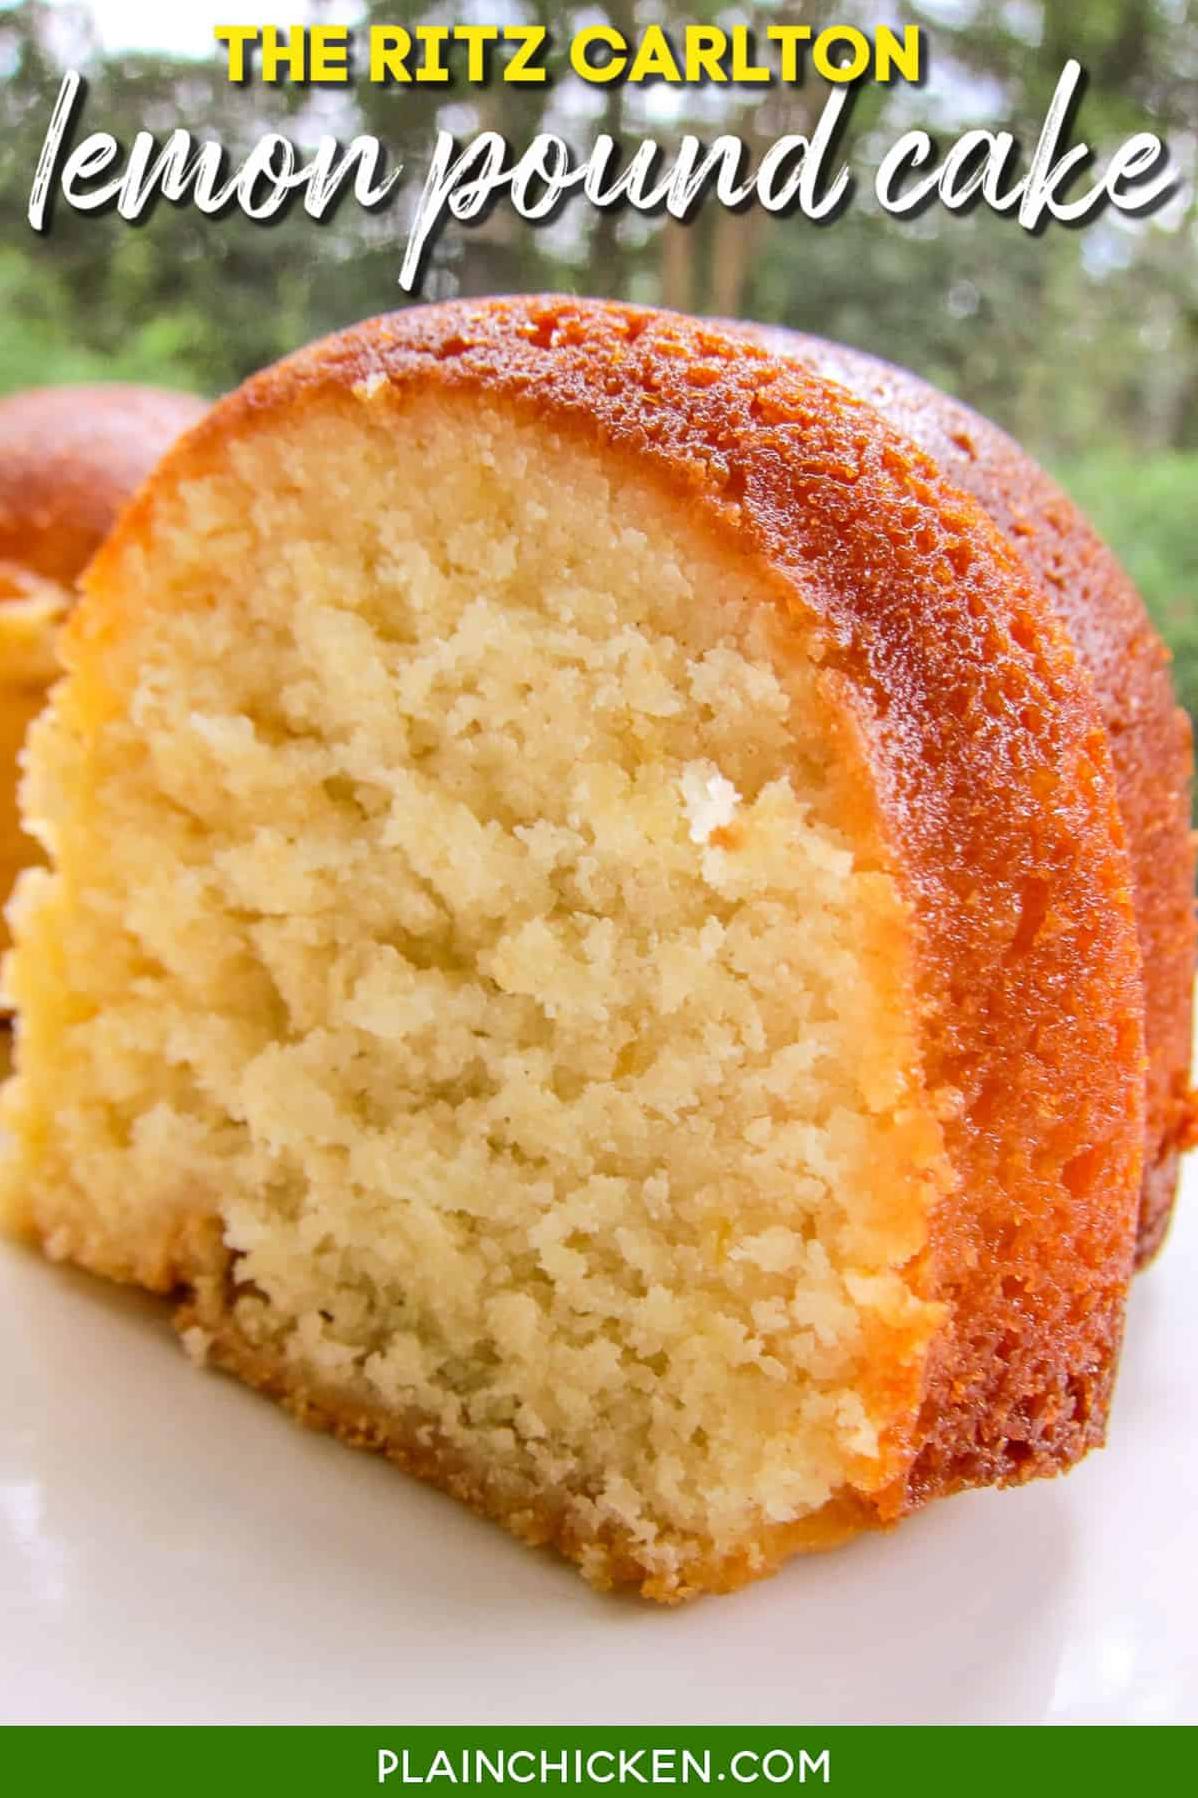  Let the sunshine in with this vibrant and zesty Lite Lemon Pound Cake